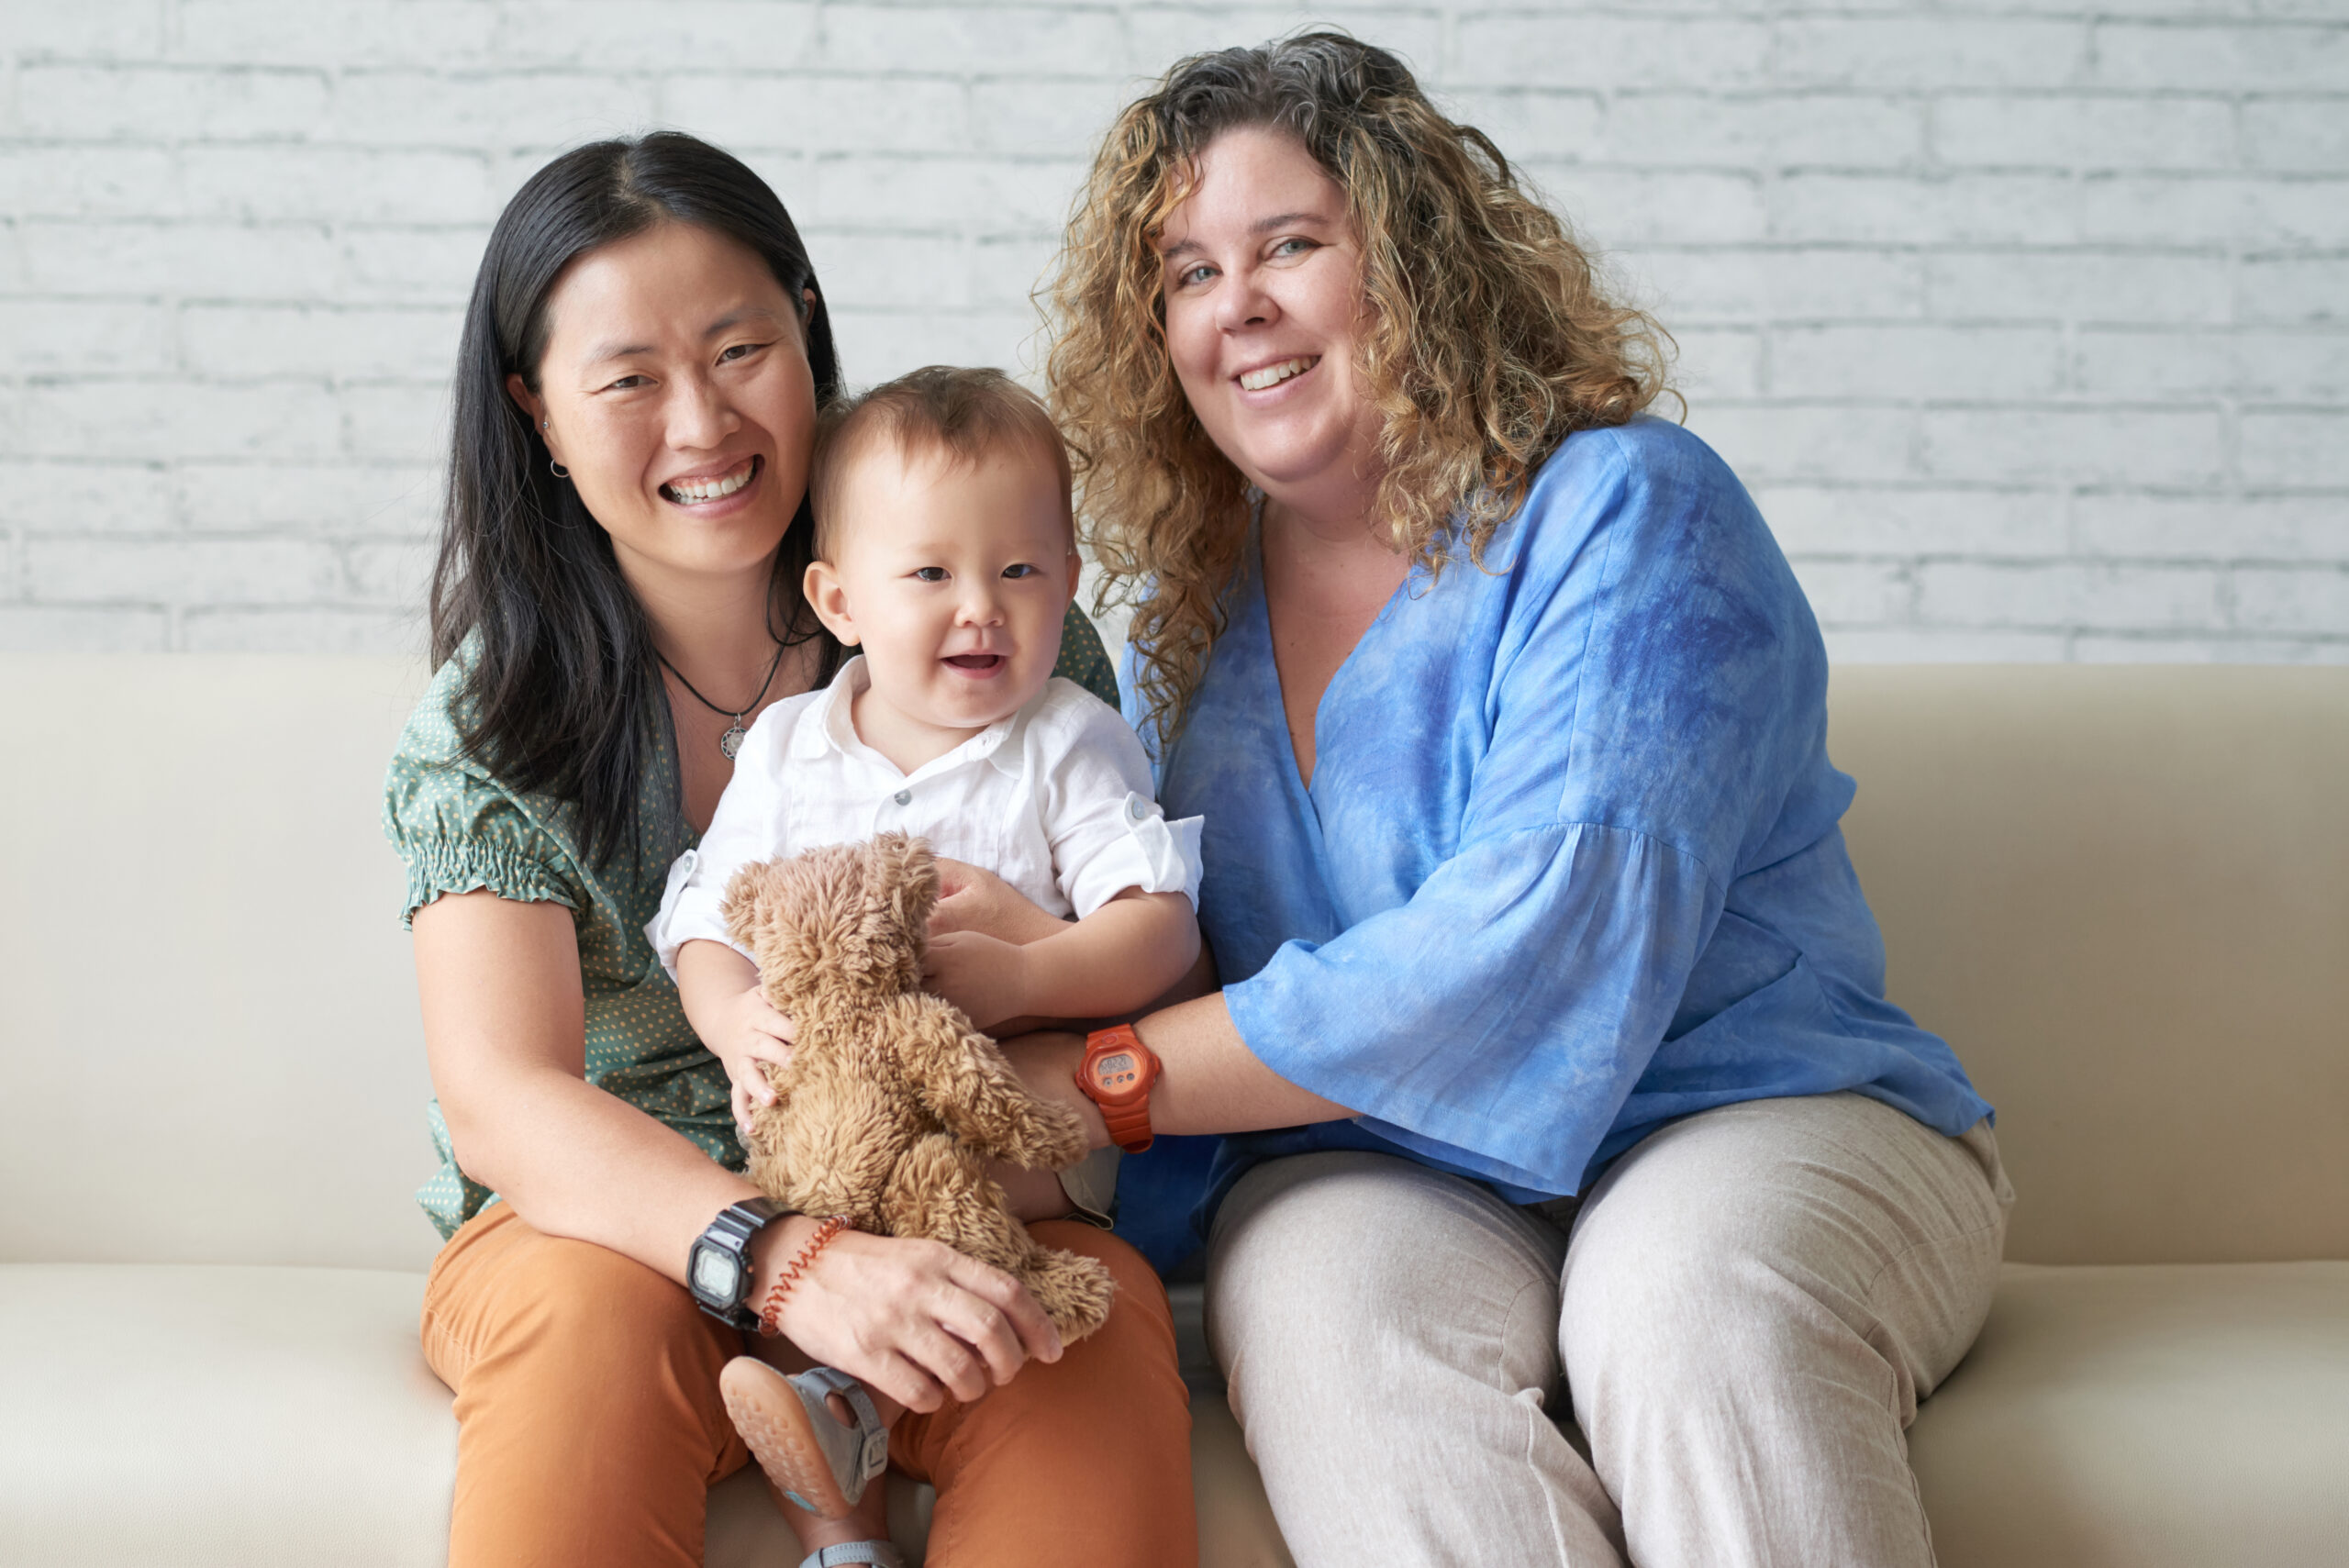 Lesbian Mom Stripped of Parental Rights